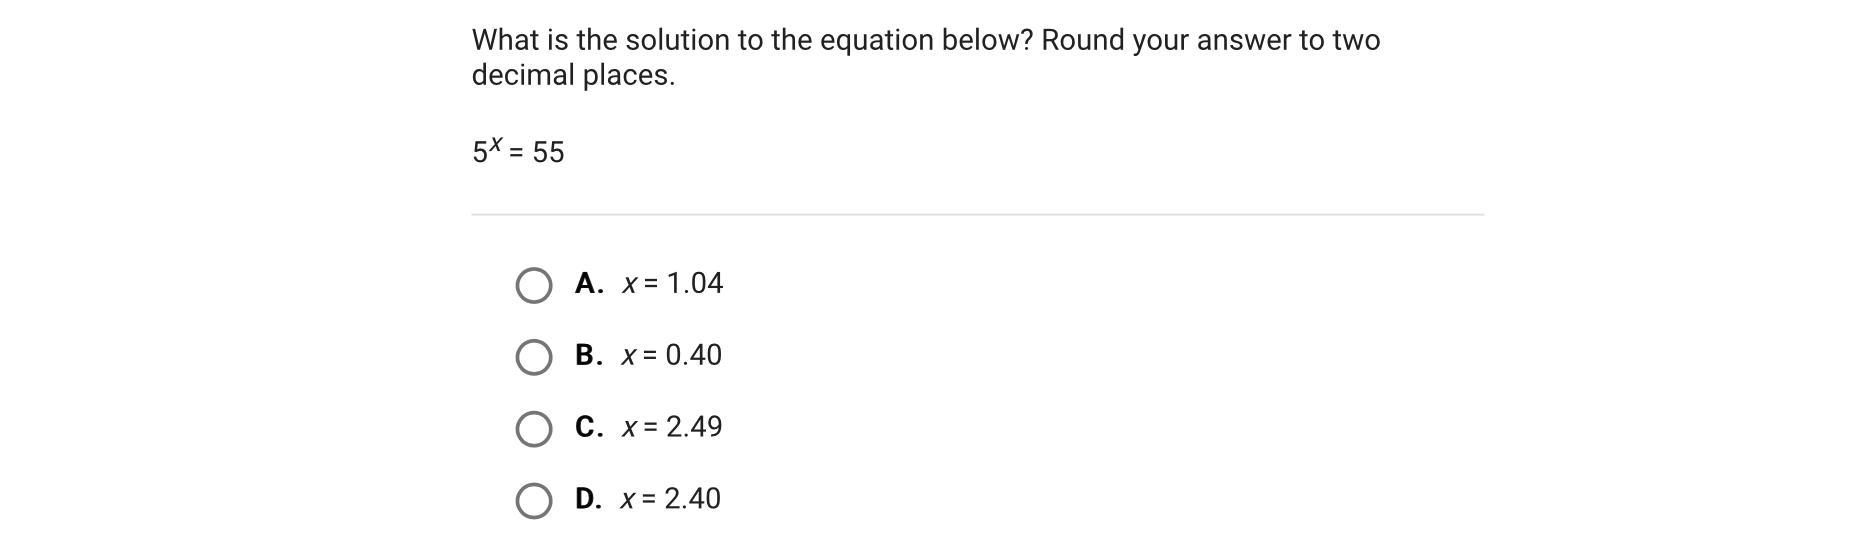 What Is The Solution To The Equation Below? Round Your Answer To Two Decimal Places.5x = 55A.x = 1.04B.x